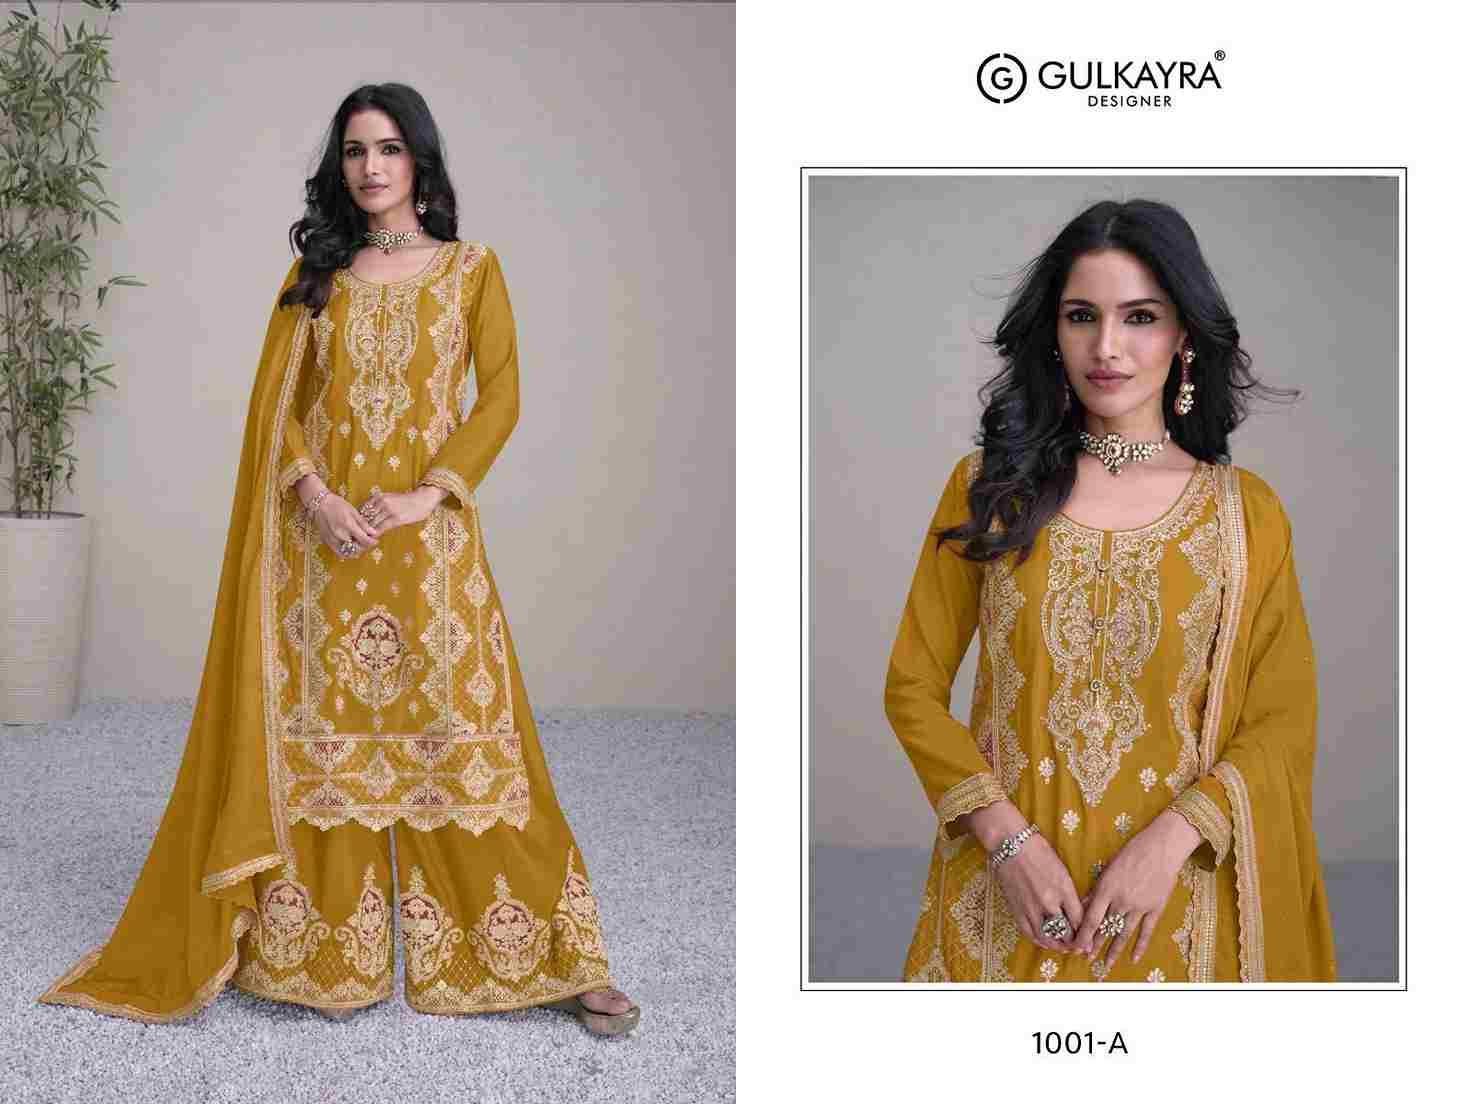 Hirwa By Gulkayra Designer 1001-A To 1001-D Series Beautiful Sharara Suits Colorful Stylish Fancy Casual Wear & Ethnic Wear Chinnon Embroidered Dresses At Wholesale Price